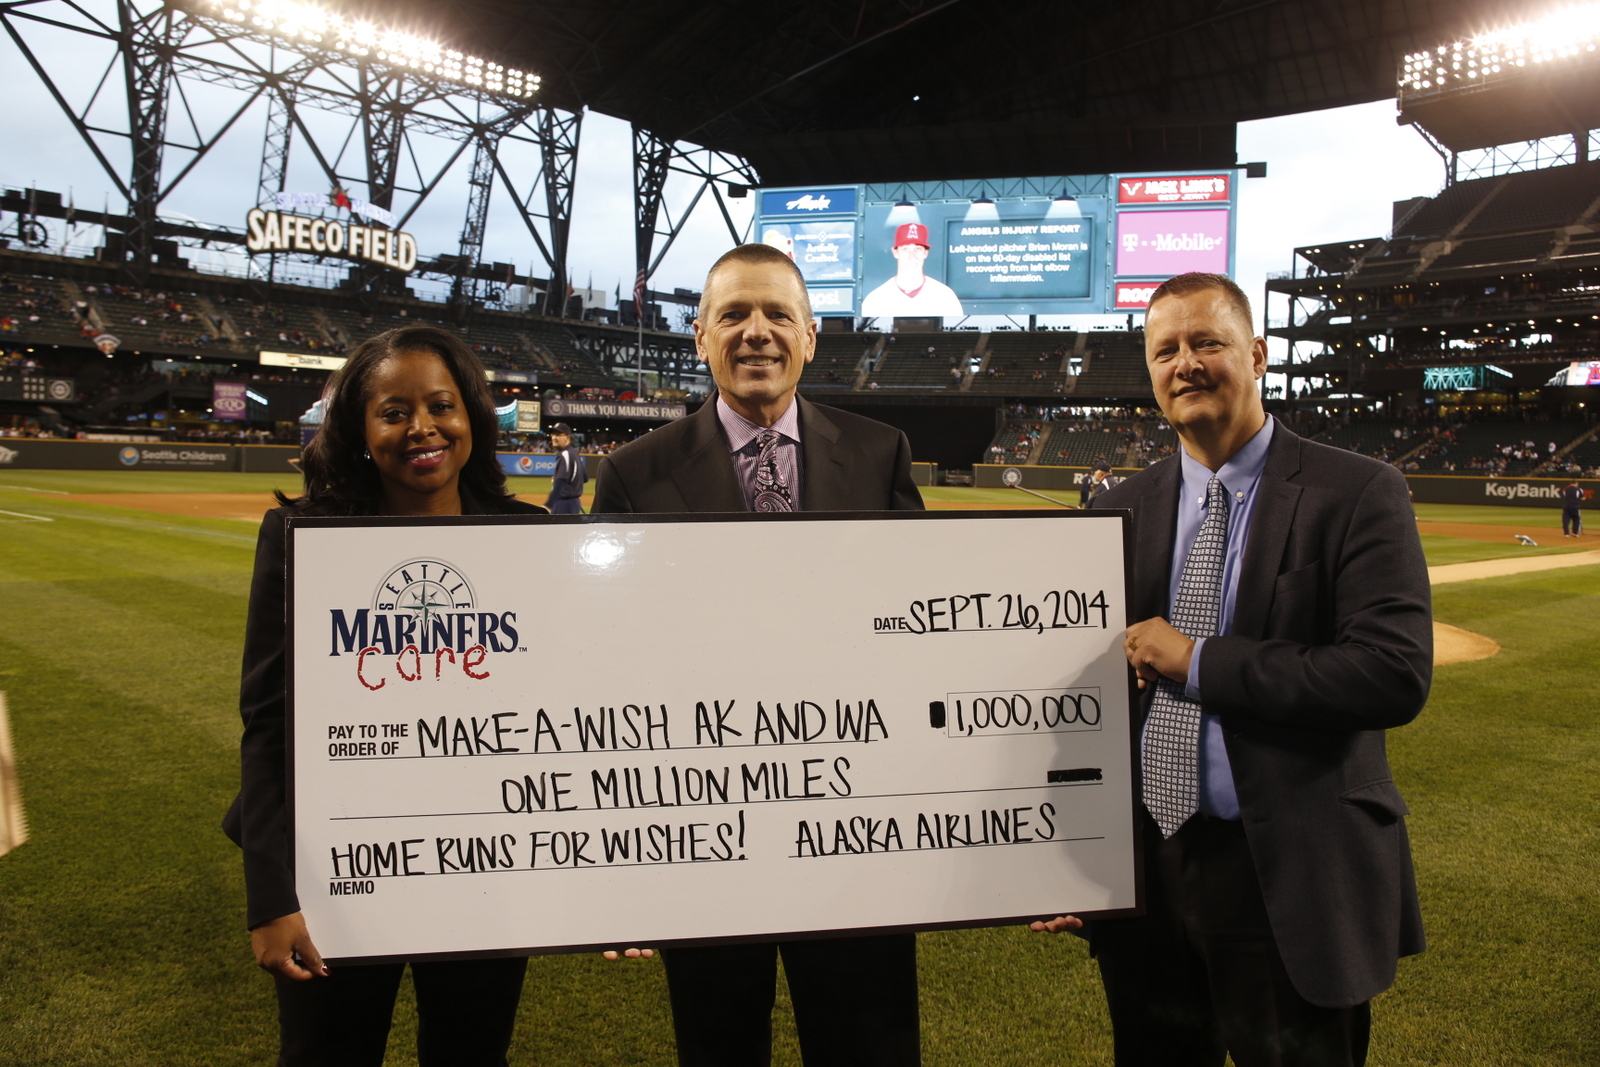 Alaska Airlines’ Shaunta Hyde presents 1 million miles to Barry McConnell, Make-a-Wish Alaska and Washington chapter president and CEO, and Make-A-Wish board chair Mitch Hansen before a Mariners game on Friday, Sept. 26.